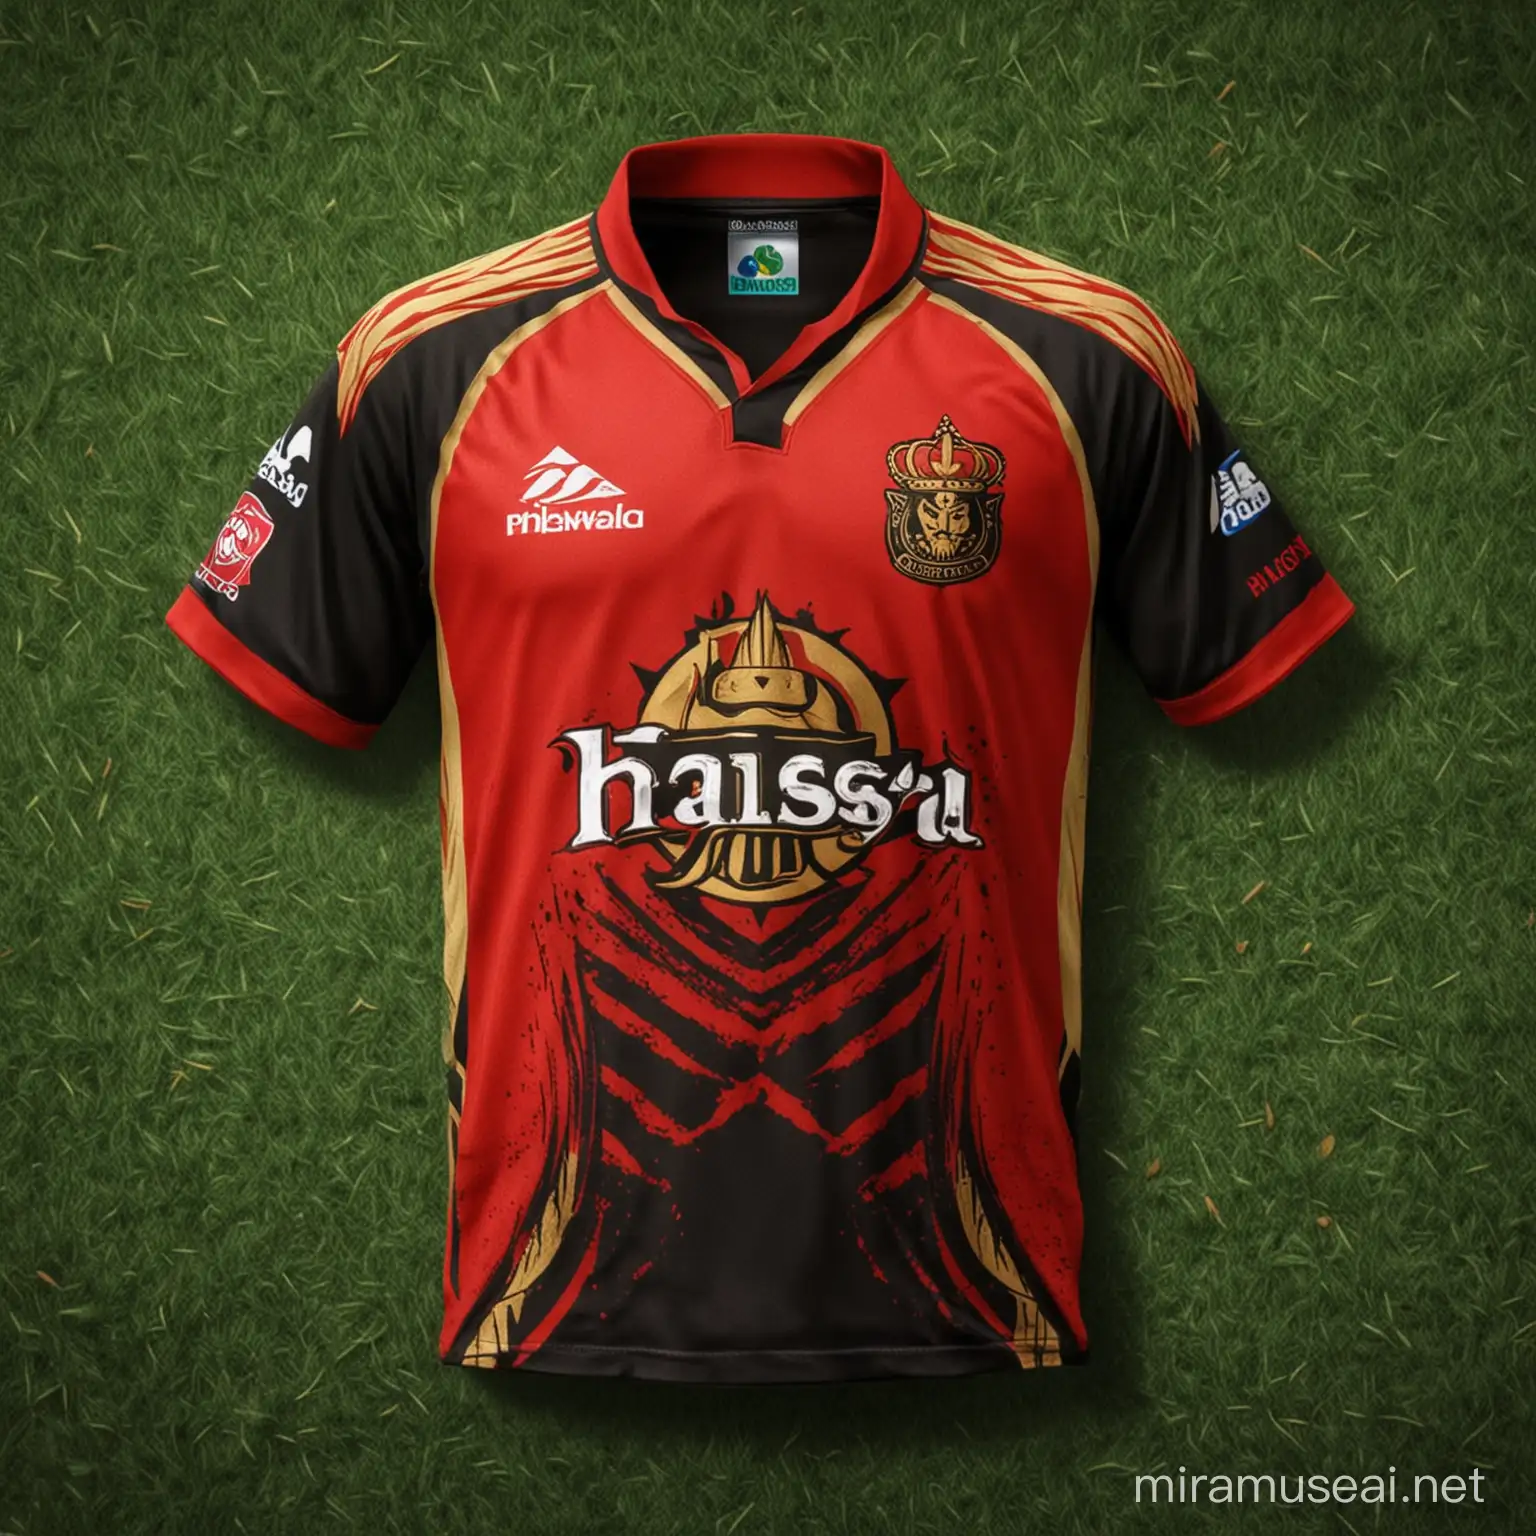 Hoysala Hawks Cricket Team Jersey Inspired by Royal Challengers Bangalore